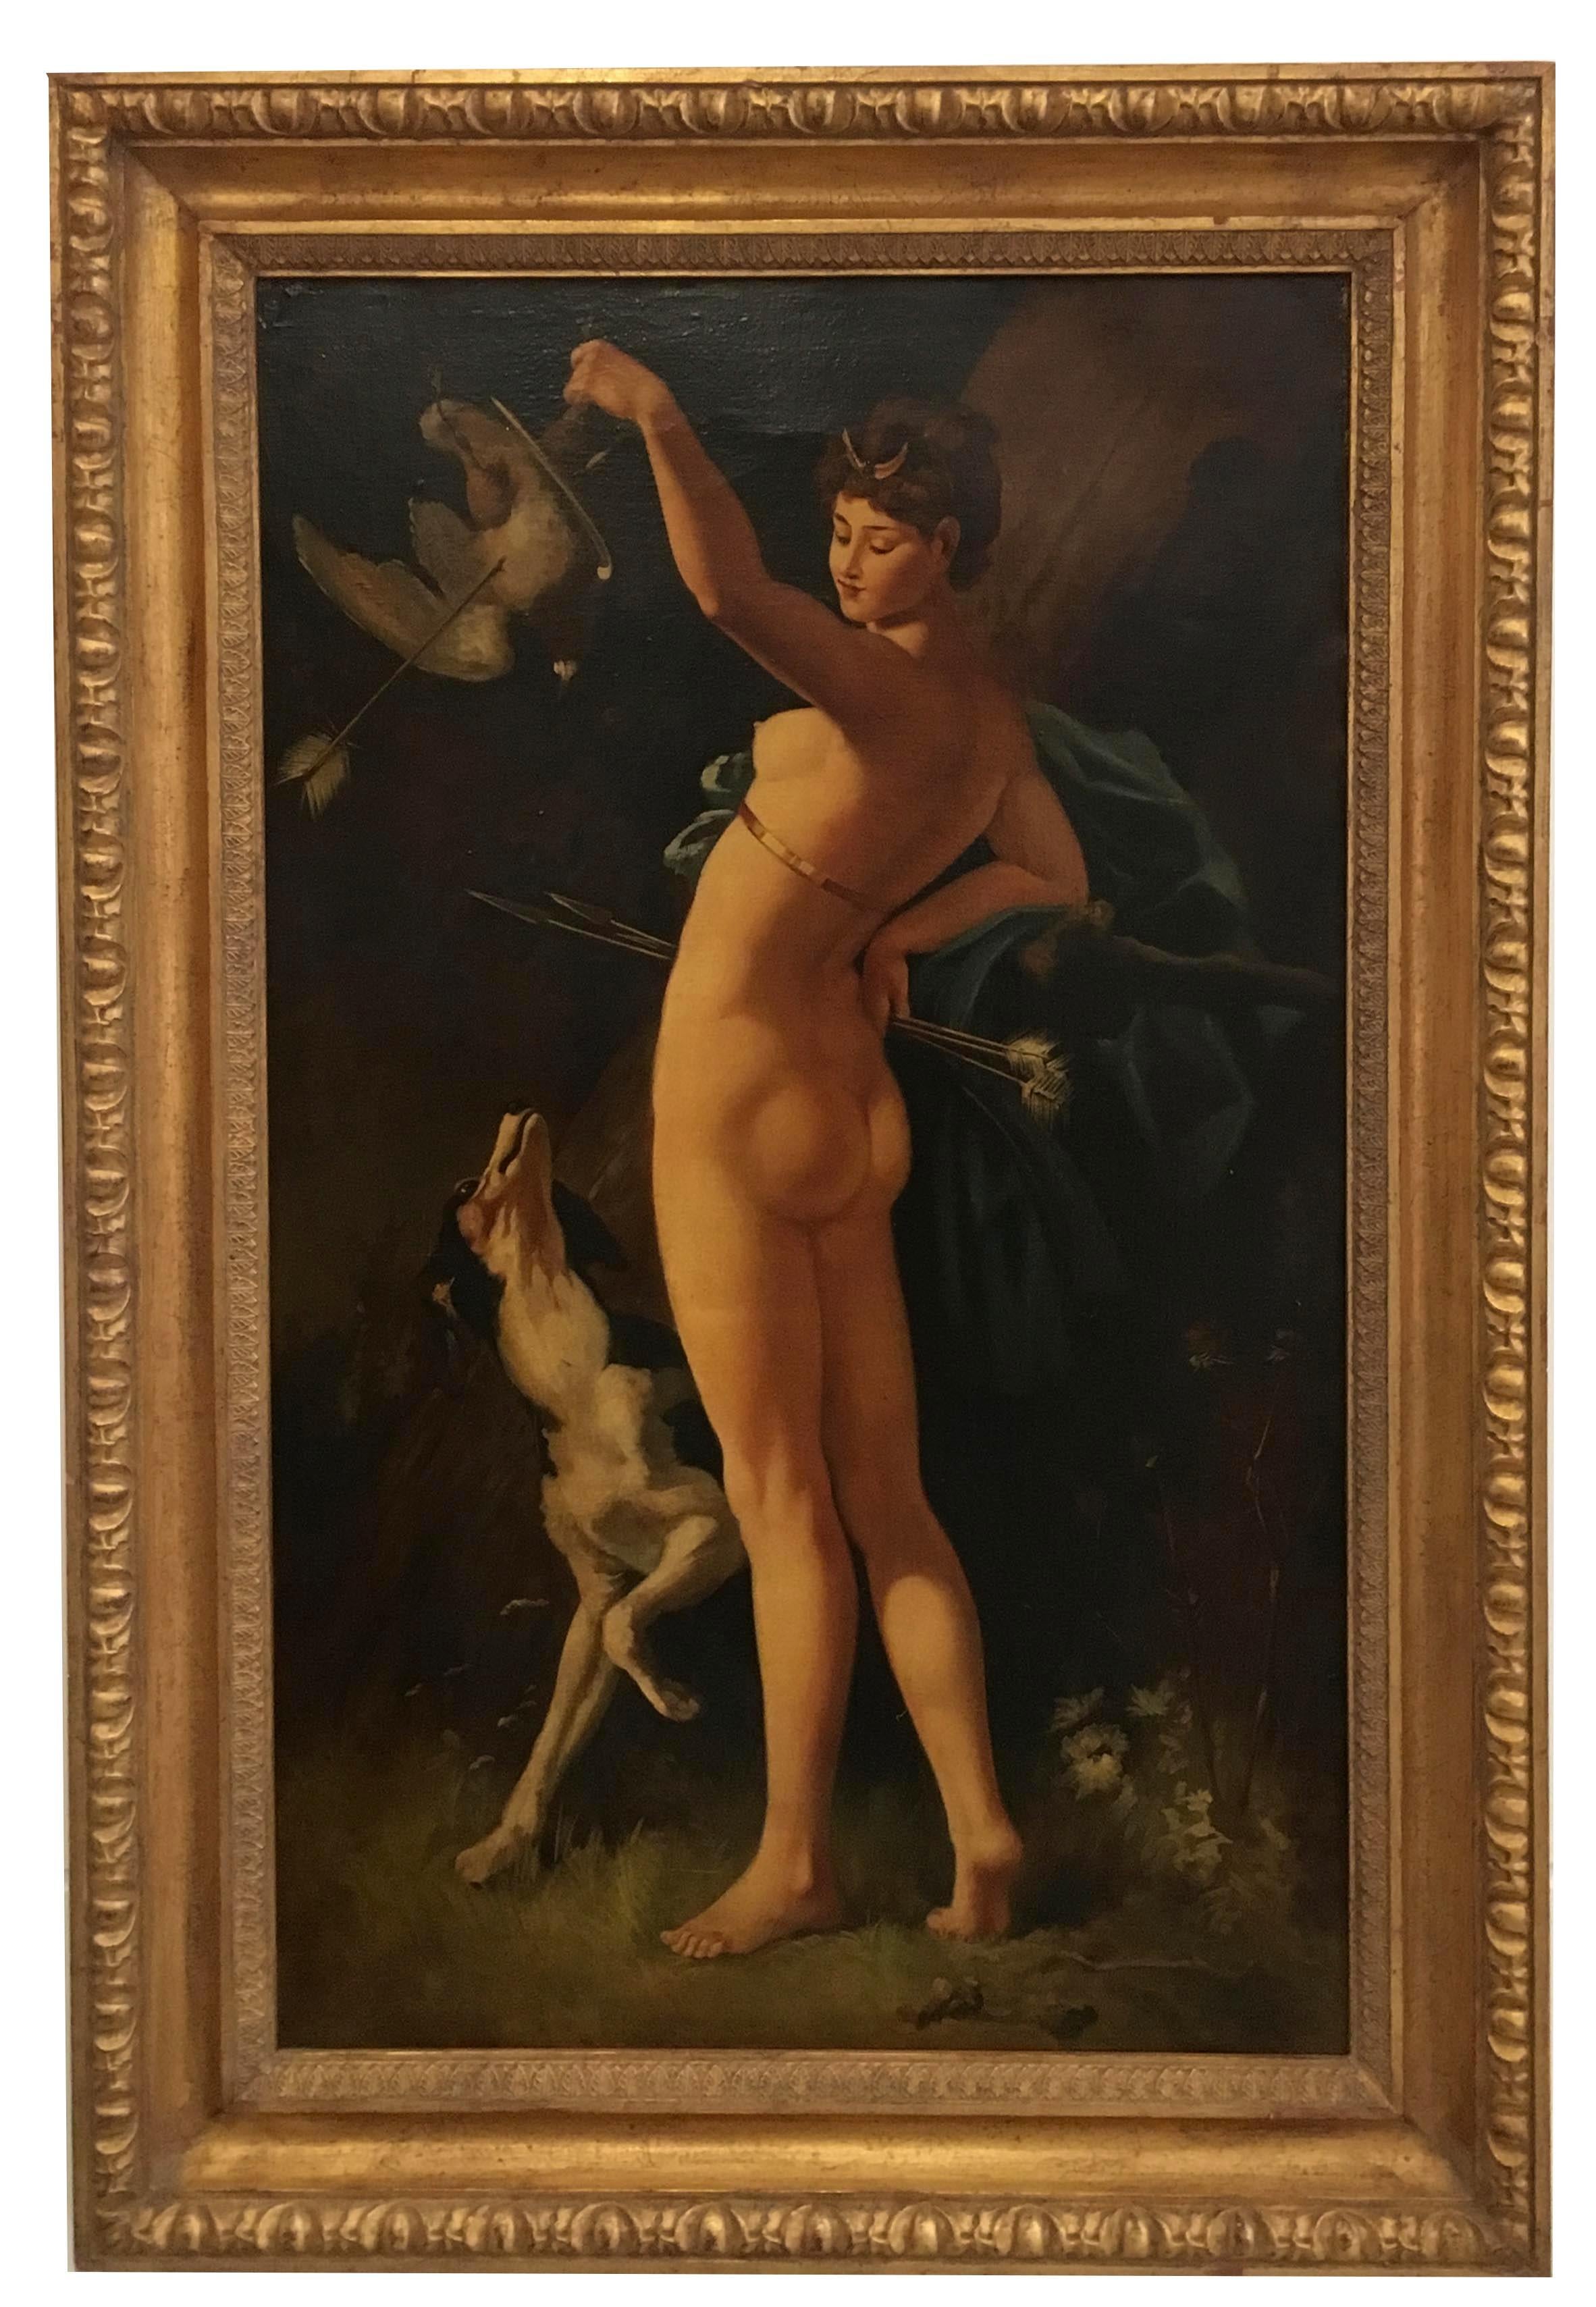 Ettore Frattini Portrait Painting - DIANA THE HUNTRESS -In the Manner of C.A.Coessin De La Foss oil on canvas paint 